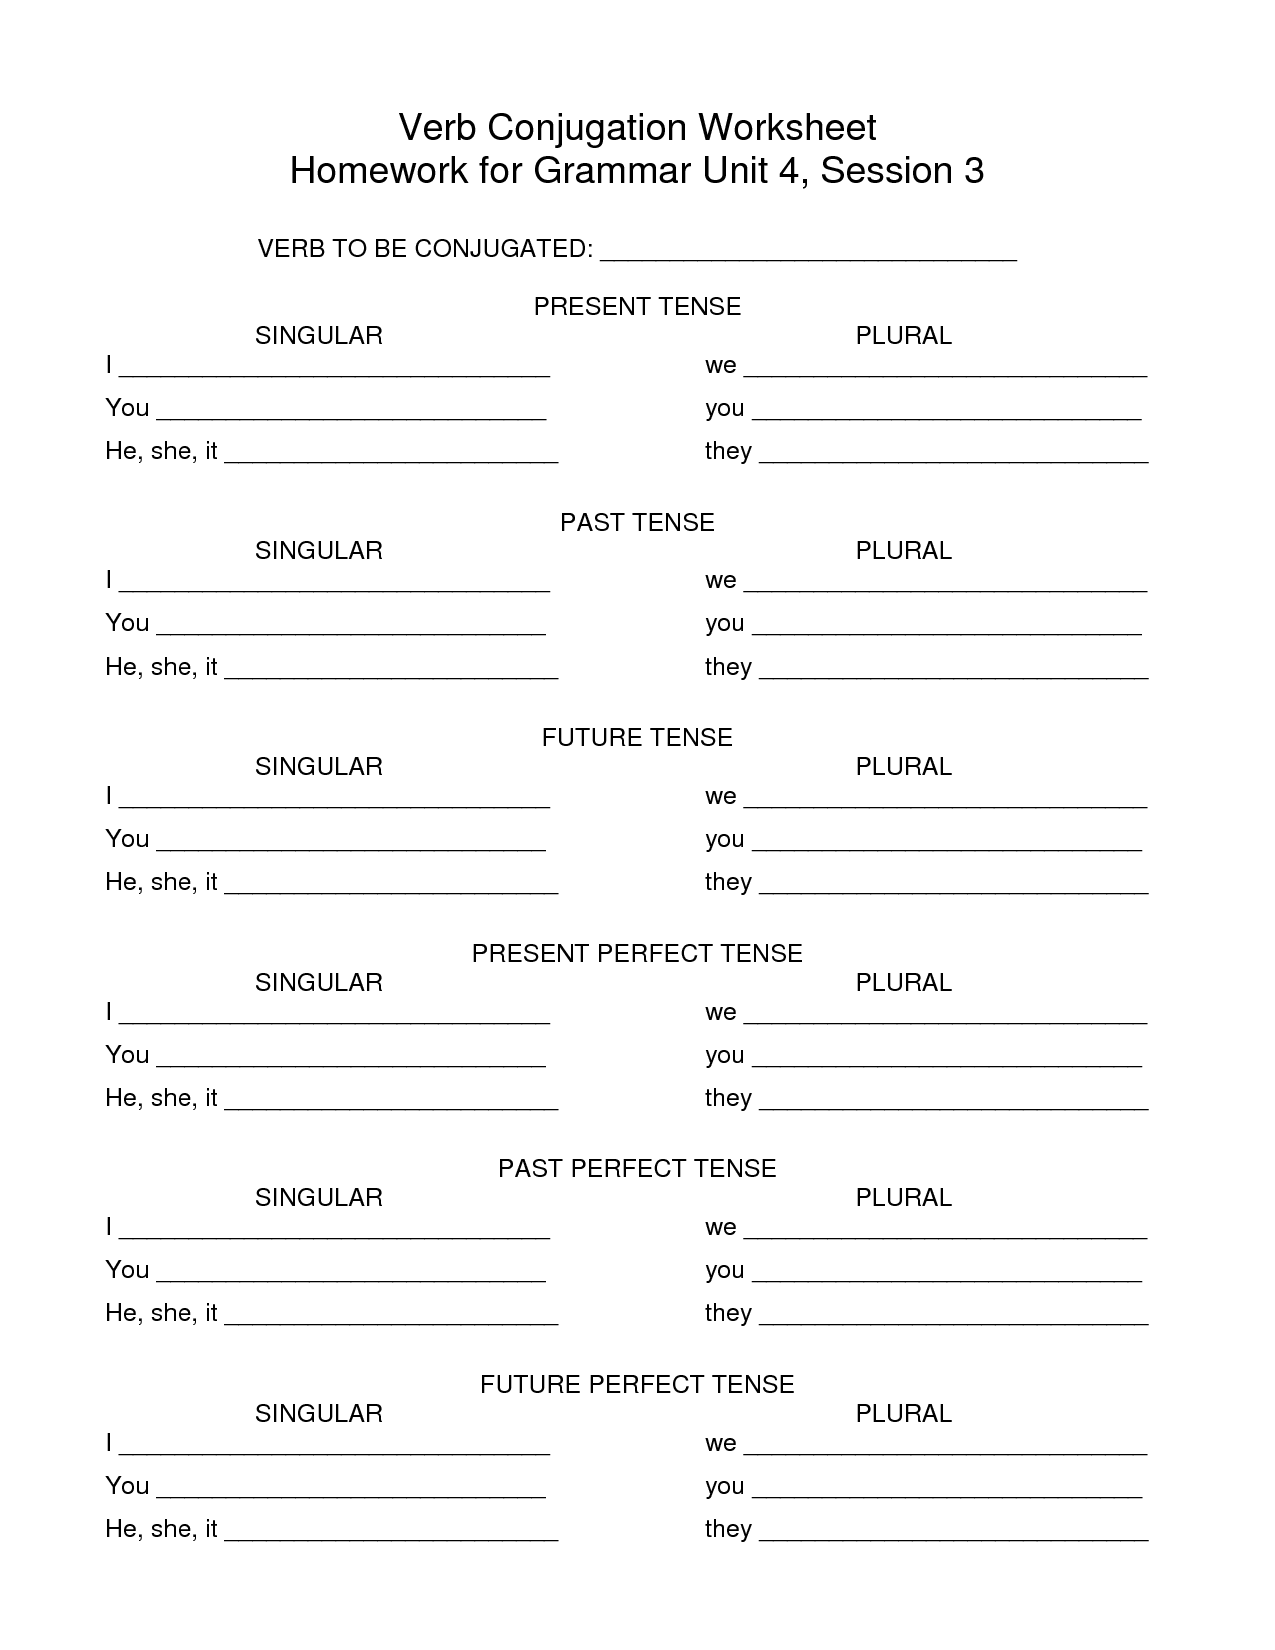 17-best-images-of-a-personal-in-spanish-worksheet-pinterest-spanish-worksheets-subject